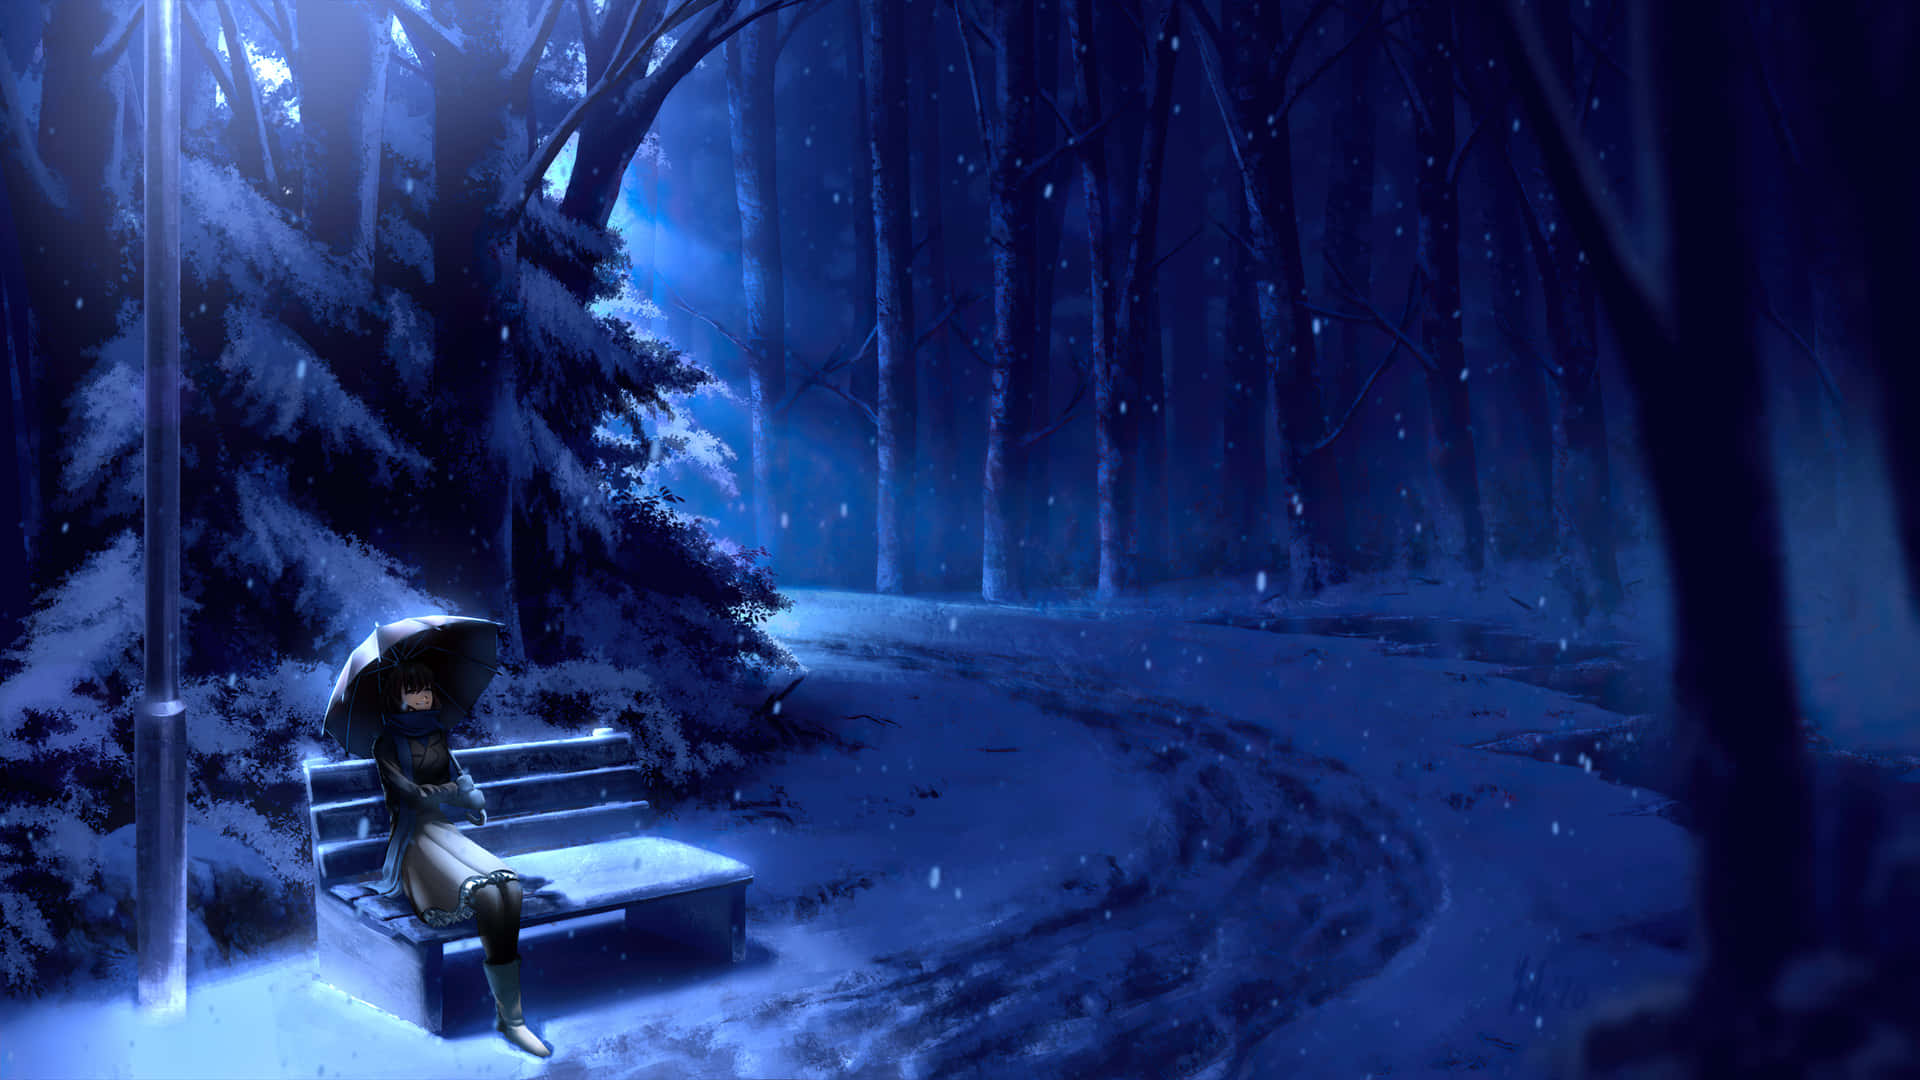 A Woman Sitting On A Bench In The Snow Wallpaper